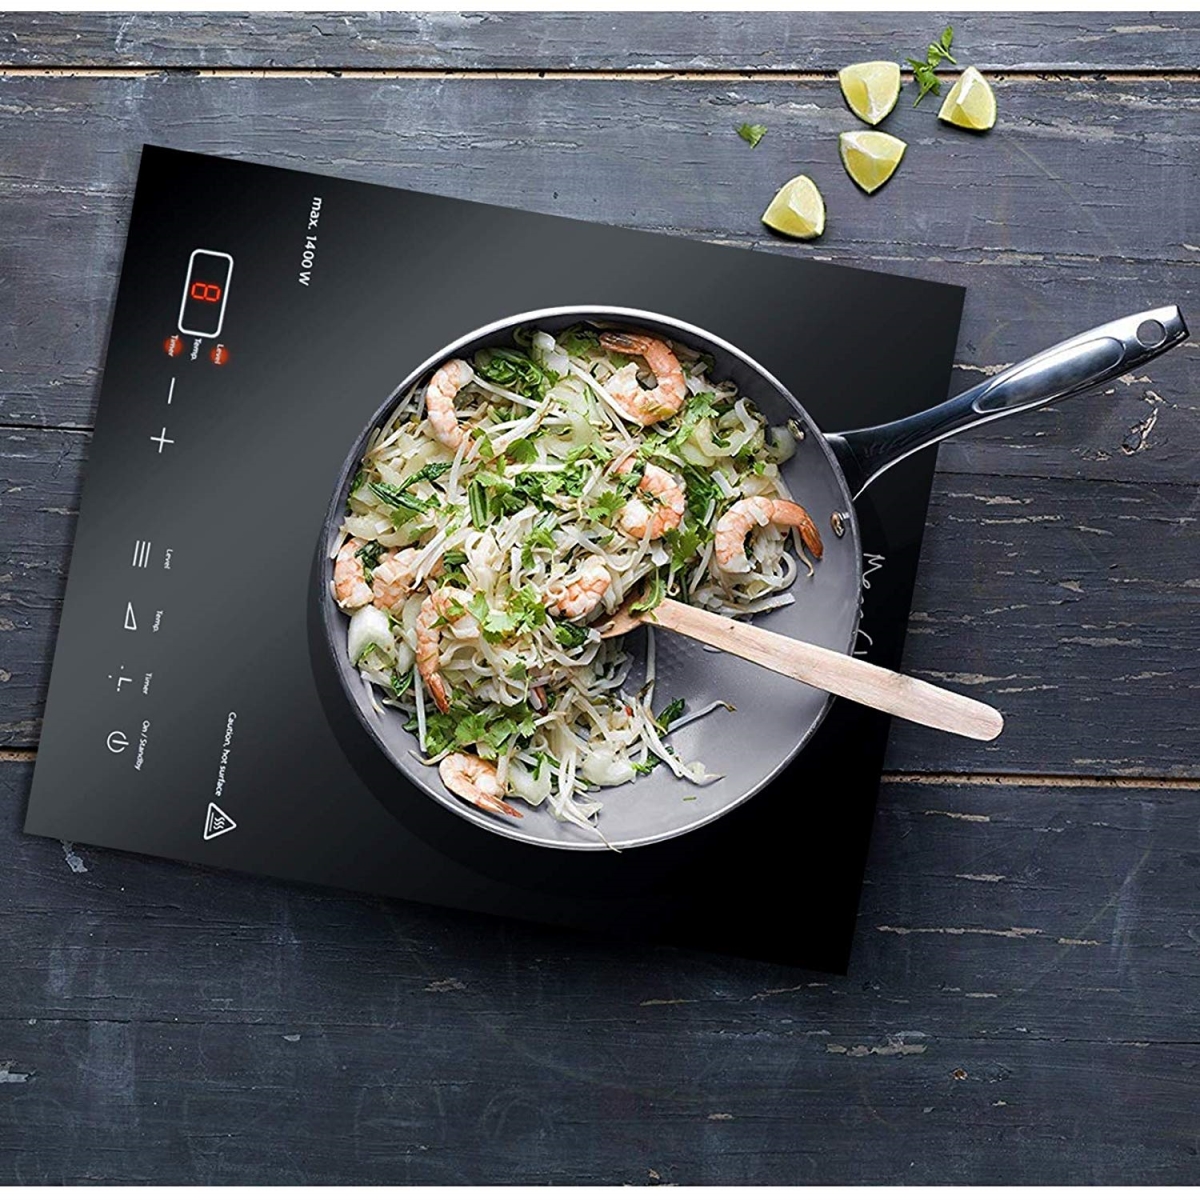 MegaChef Portable 1400W Single Induction Cooktop with Digital Control Panel - Black